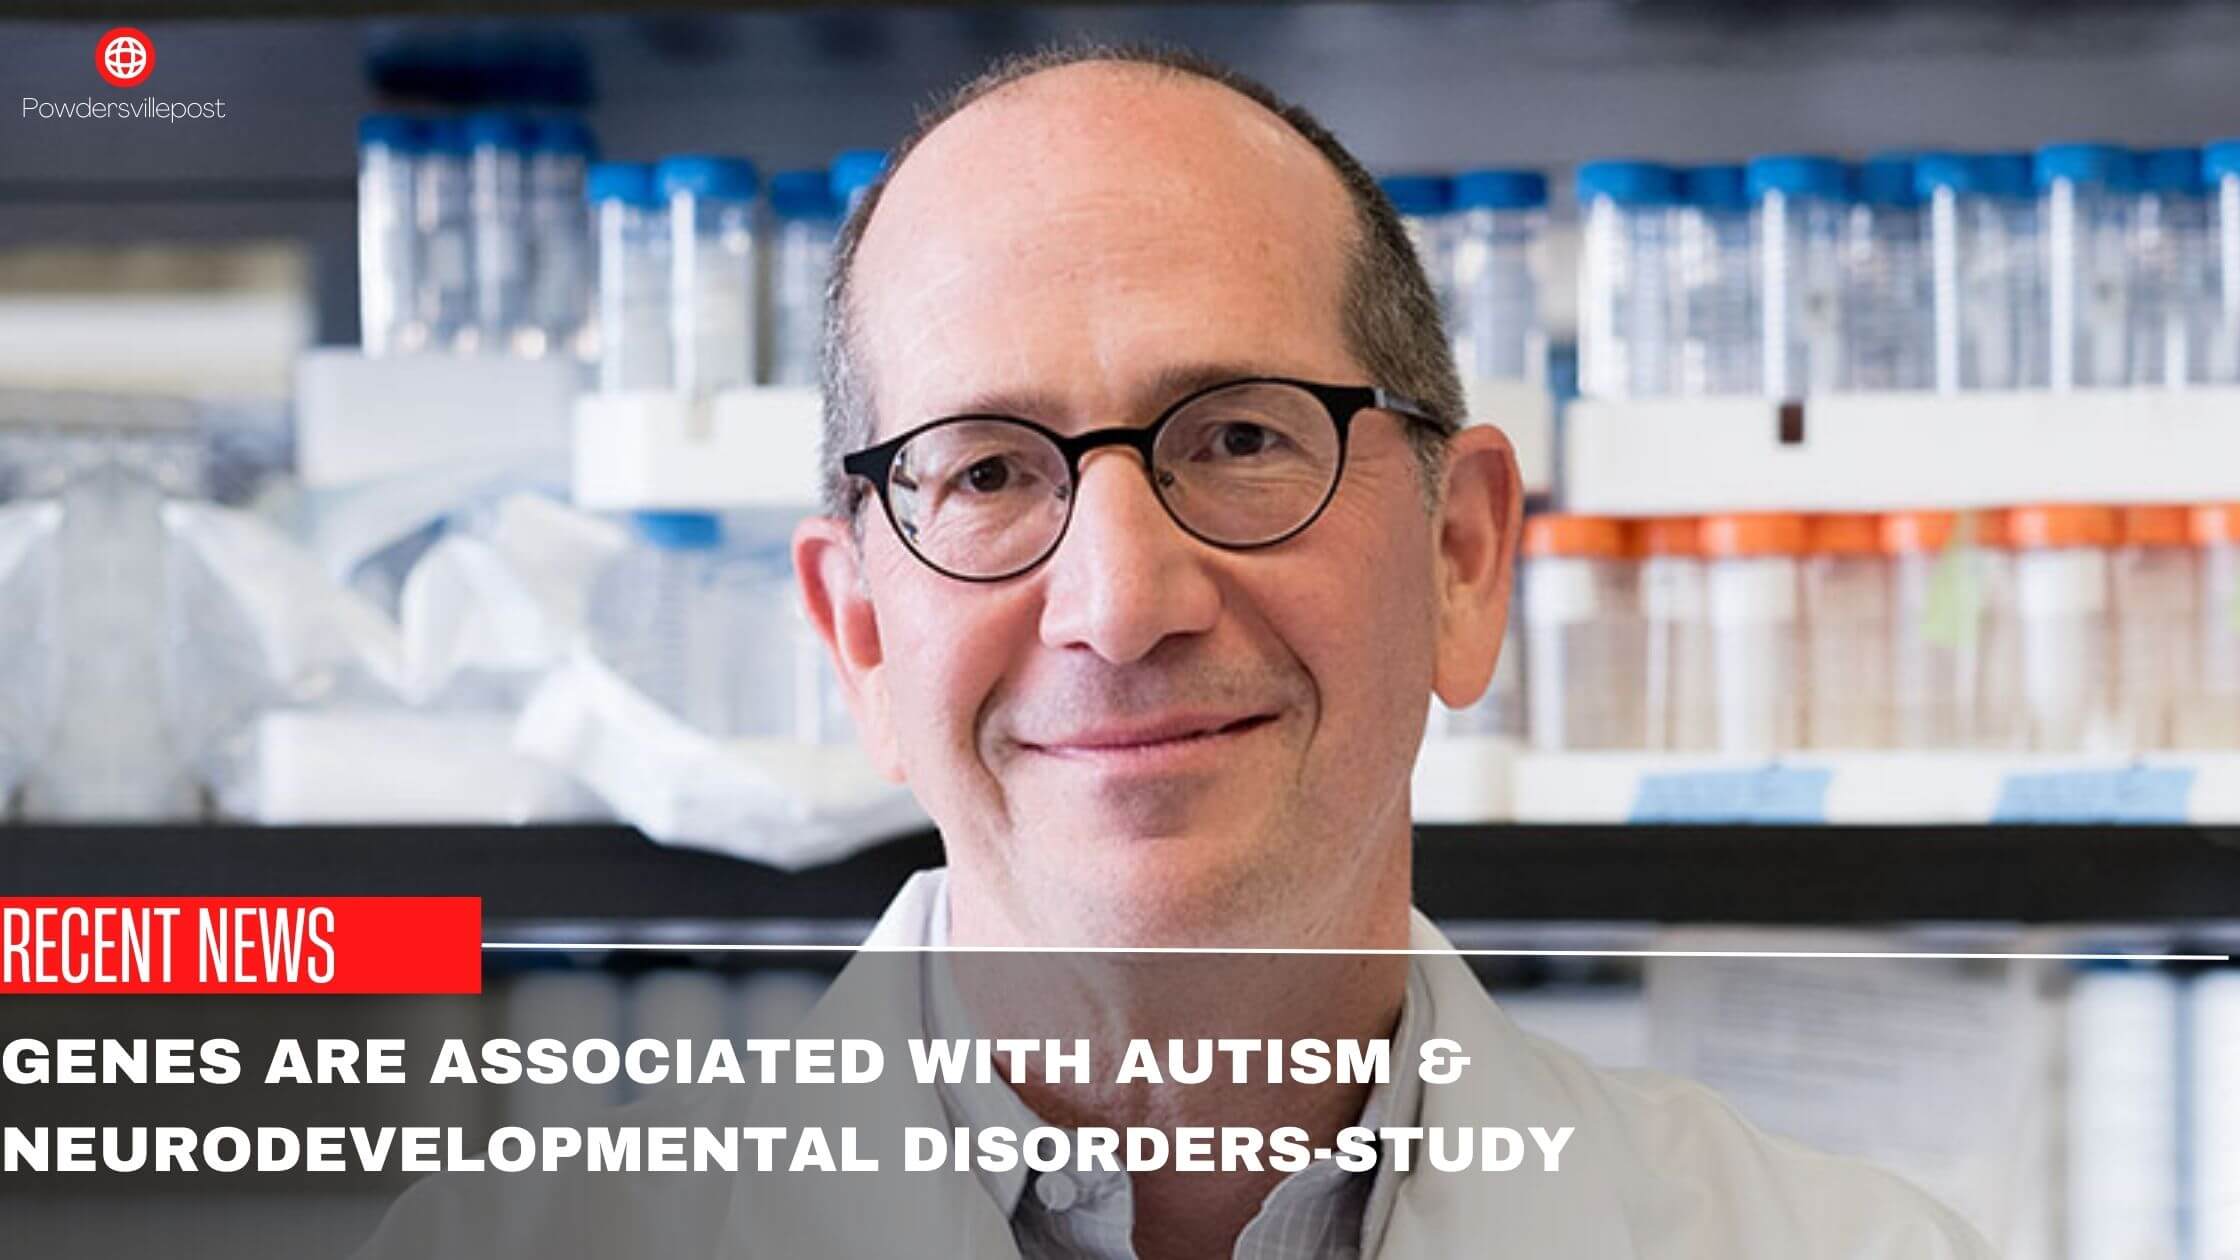 Genes Are Associated With Autism & Neurodevelopmental Disorders-Study